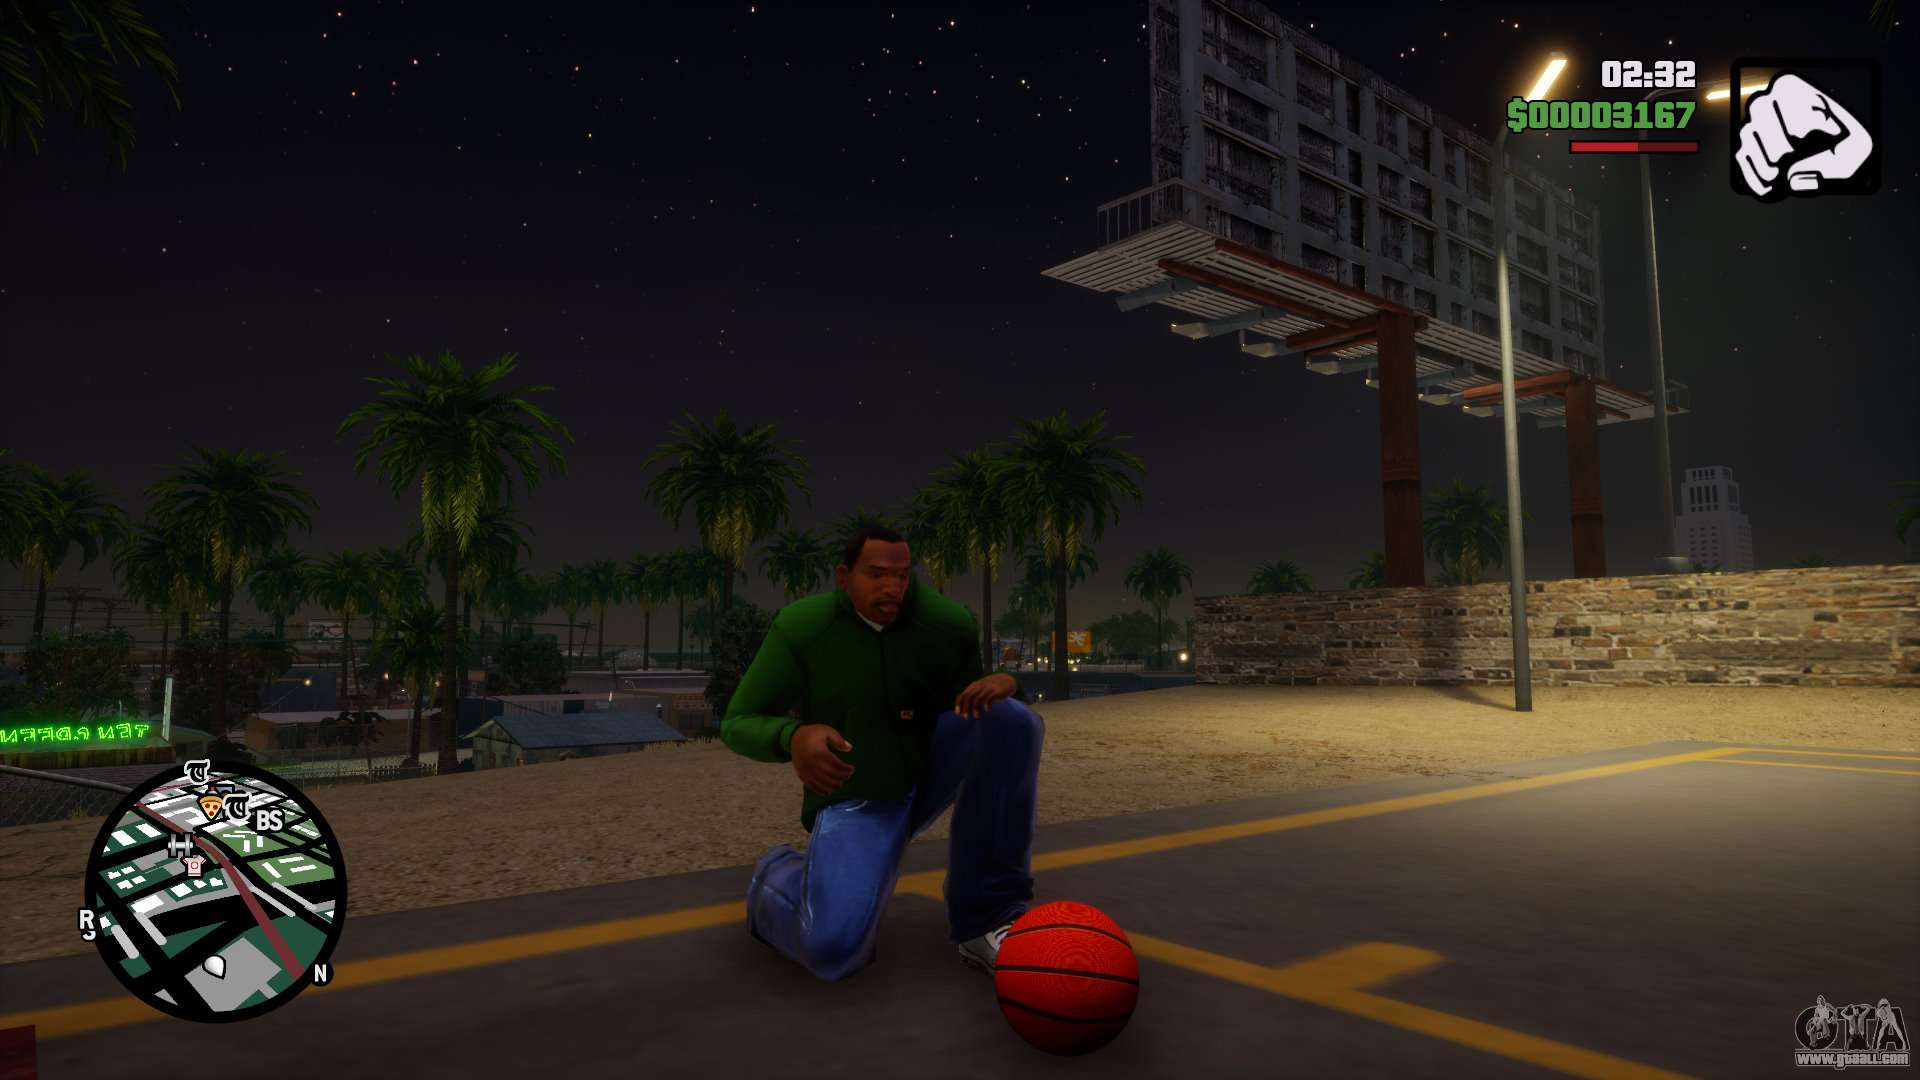 How to play Basketball in GTA: San Andreas Definitive Edition? (Hoopin' it  Up achievement)